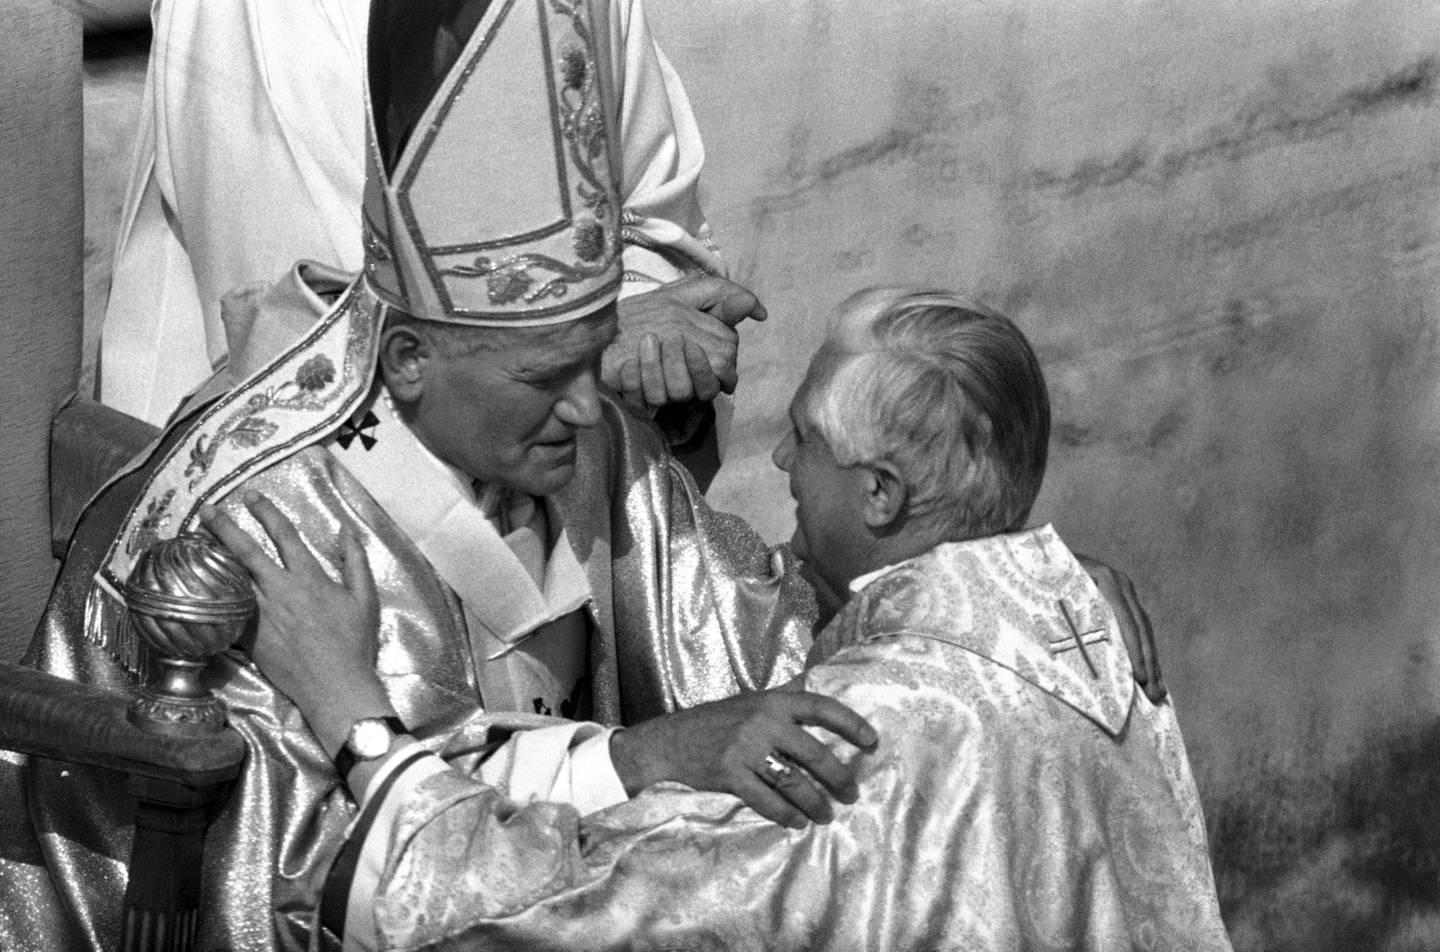 FILE - Pope John Paul II places his hands on the shoulders of West German Cardinal Joseph Ratzinger, archbishop of Munich and Freising, on Oct. 22, 1978, during the solemn inauguration of his ministry as universal Pastor of the Church in Vatican City. As John Paul’s right-hand man on doctrinal matters, Ratzinger wrote documents reinforcing church teaching opposing homosexuality, abortion and euthanasia, and asserting that salvation can only be found in the Catholic Church. Pope Emeritus Benedict XVI, the German theologian who will be remembered as the first pope in 600 years to resign, has died, the Vatican announced Saturday Dec. 31, 2022. He was 95. (AP Photo, File)